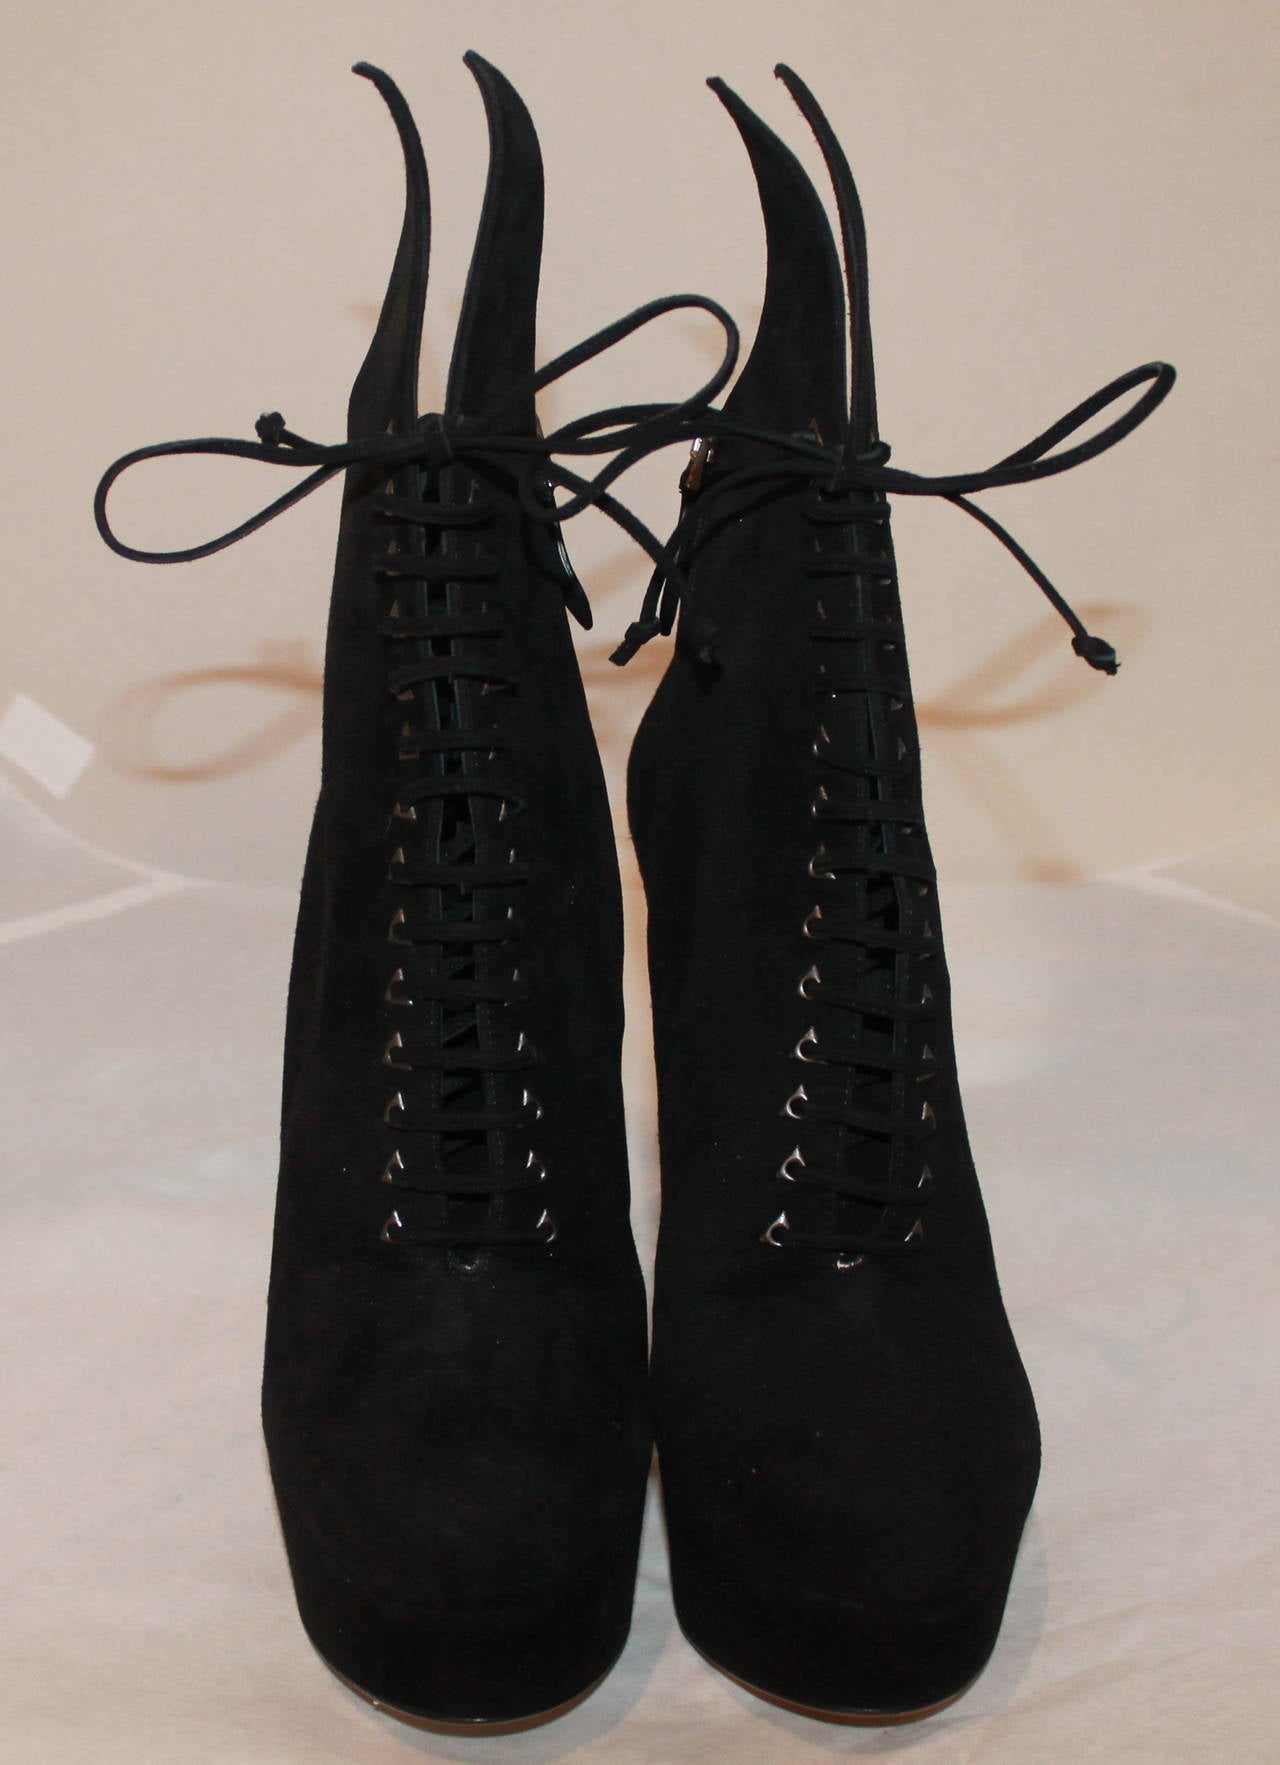 Alaia Black Suede Lace Up Platform Bootie - 40.5 - $ Retail. These boots are in impeccable condition and come with its box and dusters.